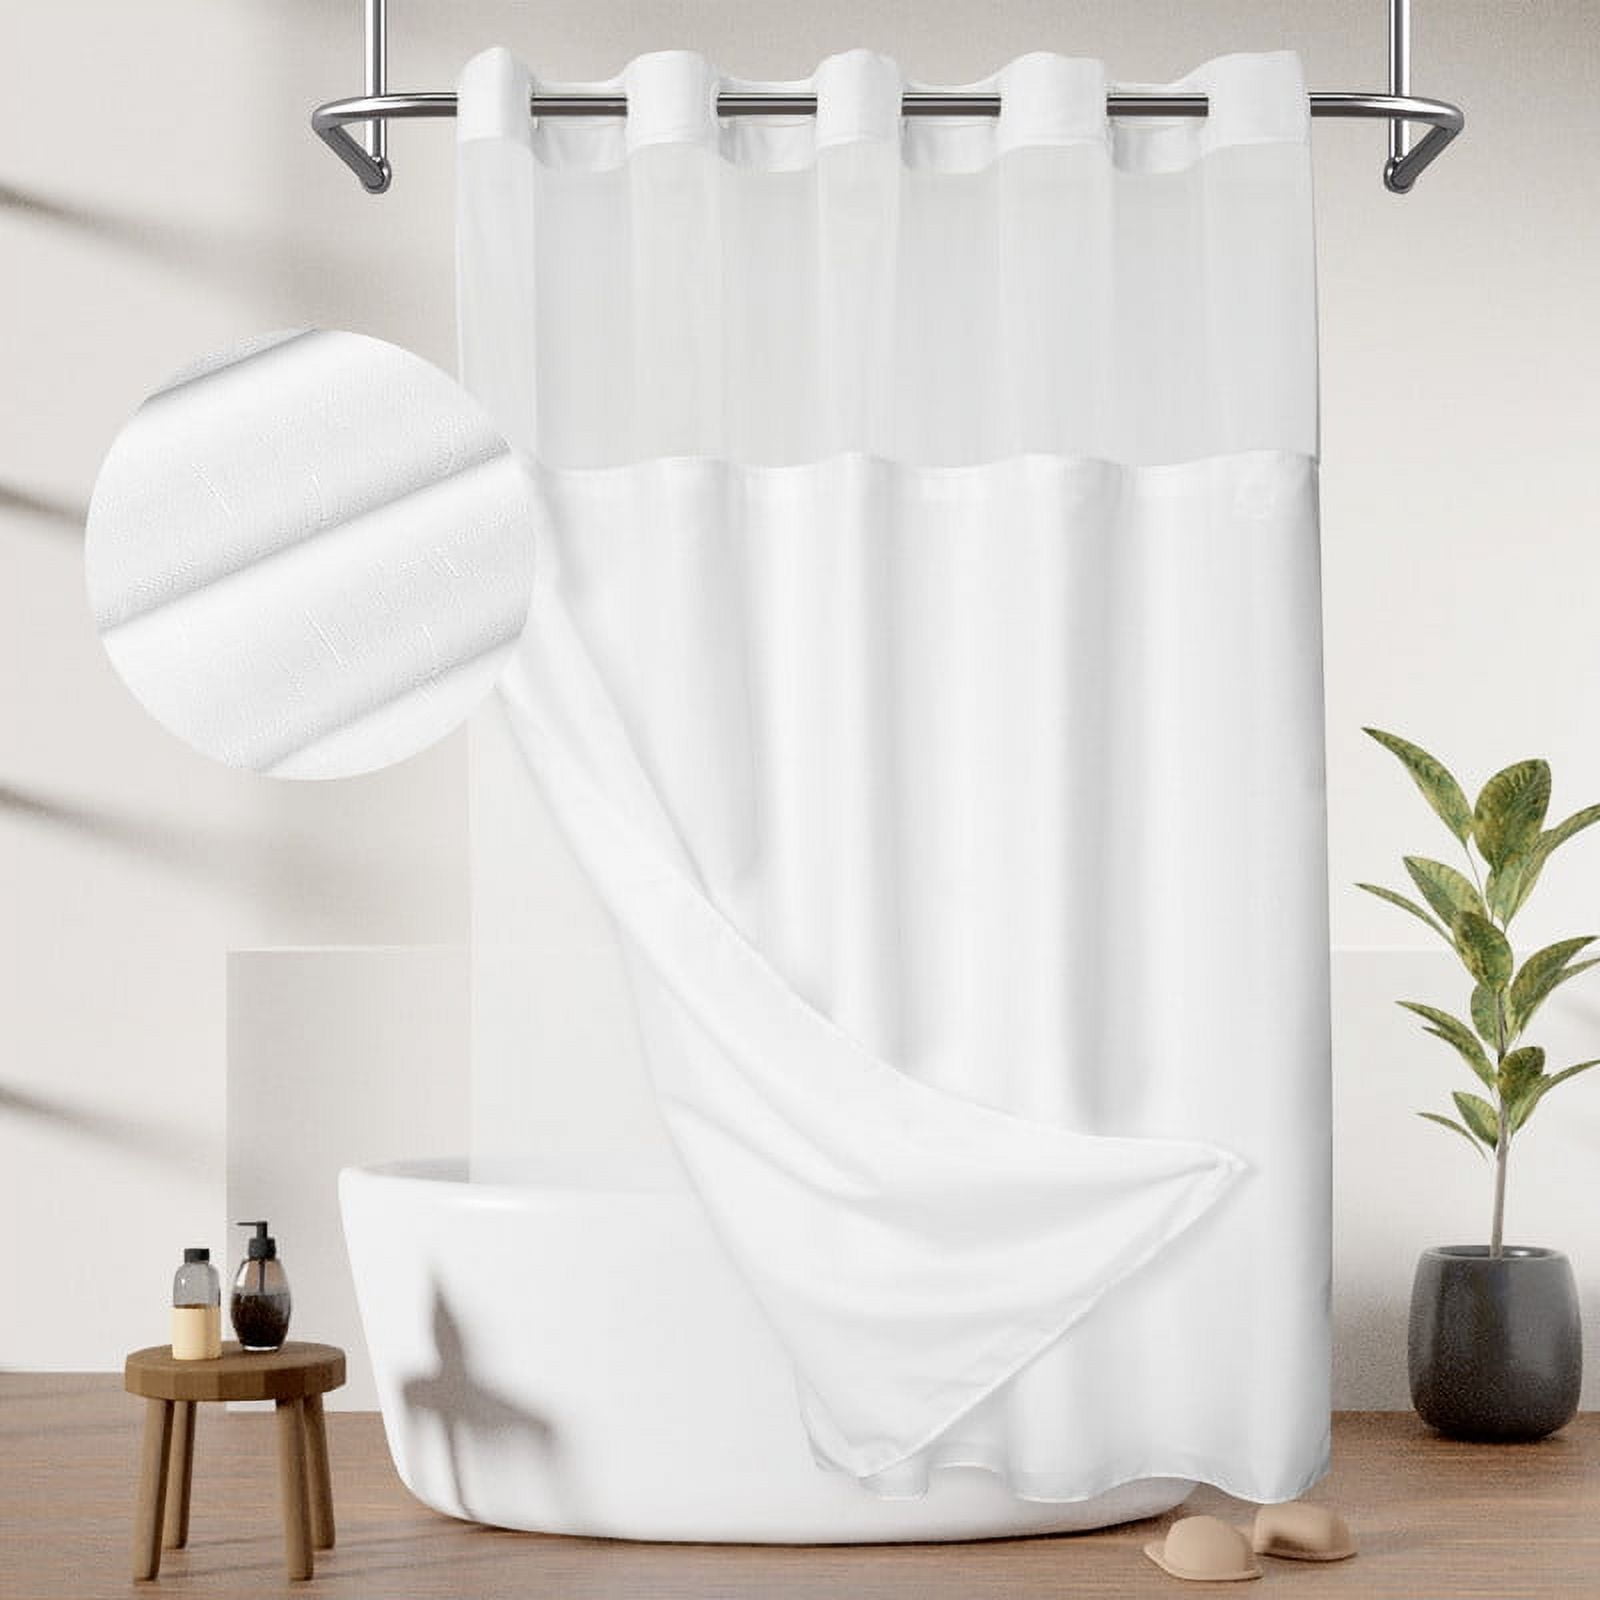 No Hooks Needed Textrue Fabric Shower Curtain with Snap in Liner - Hotel  Grade, Spa Like - 71x74 inch, White